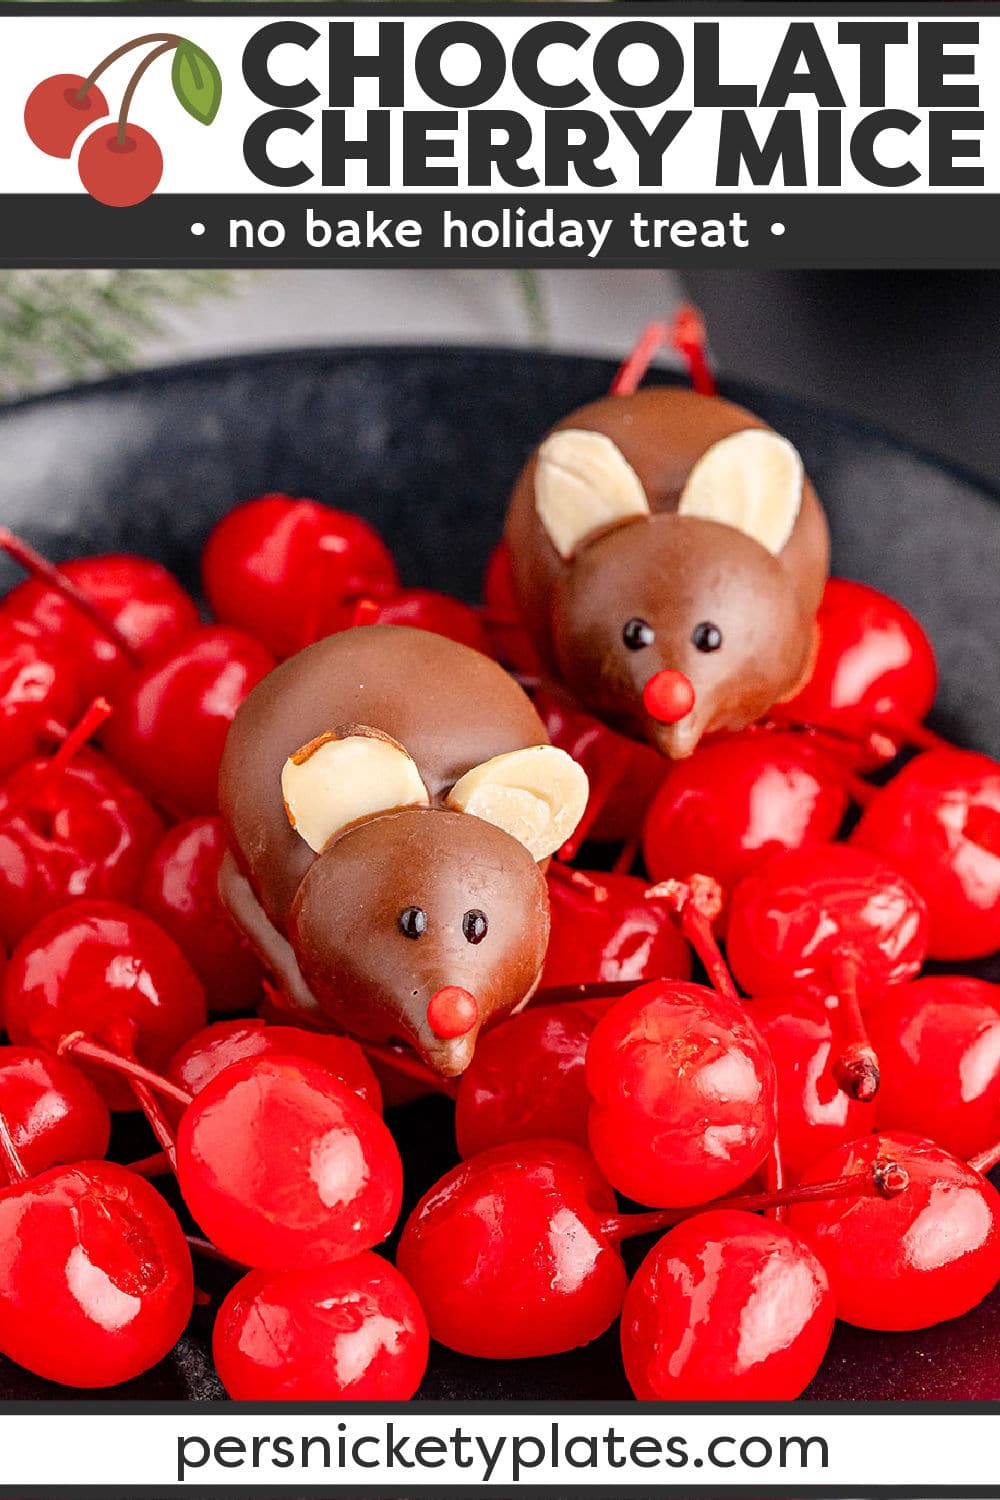 These edible chocolate-covered cherry mice are made with a maraschino cherry dipped in melted chocolate. We use a Hershey's Kiss for the face, almond slices for the ears, and icing and sprinkles for the eyes and the nose. These fun little treats will make a whimsical addition to this year's holiday celebrations! | www.persnicketyplates.com